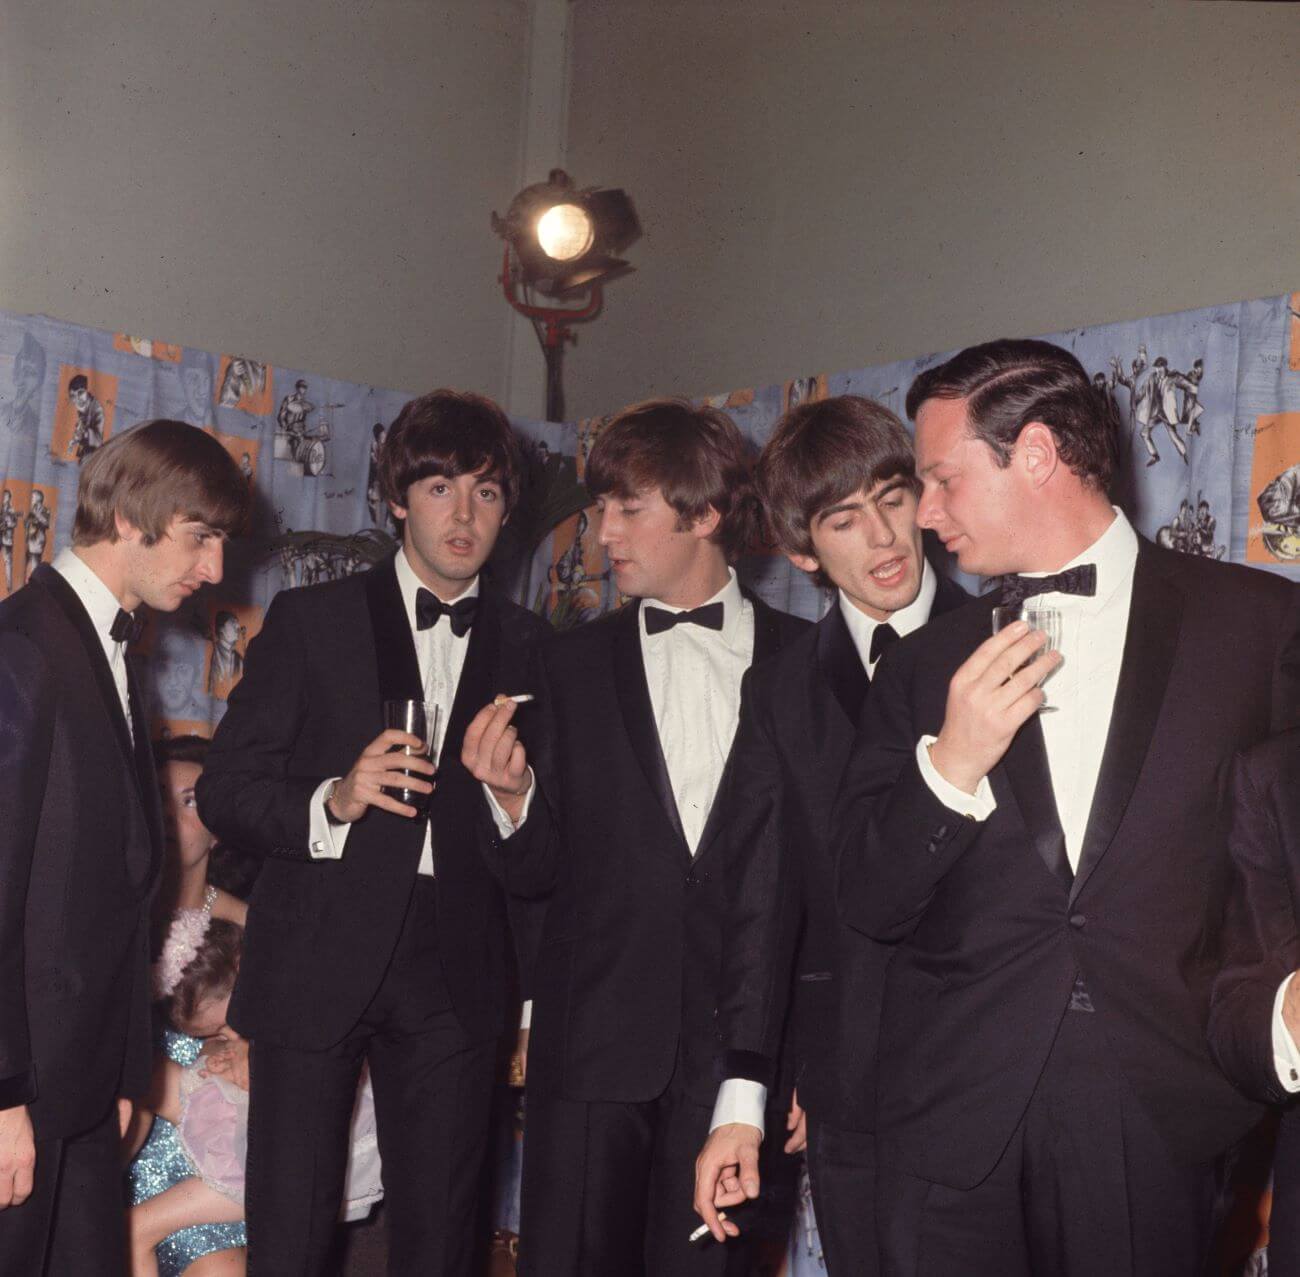 Ringo Starr, Paul McCartney, John Lennon, George Harrison, and Brian Epstein wears tuxedos and stand in a line. 